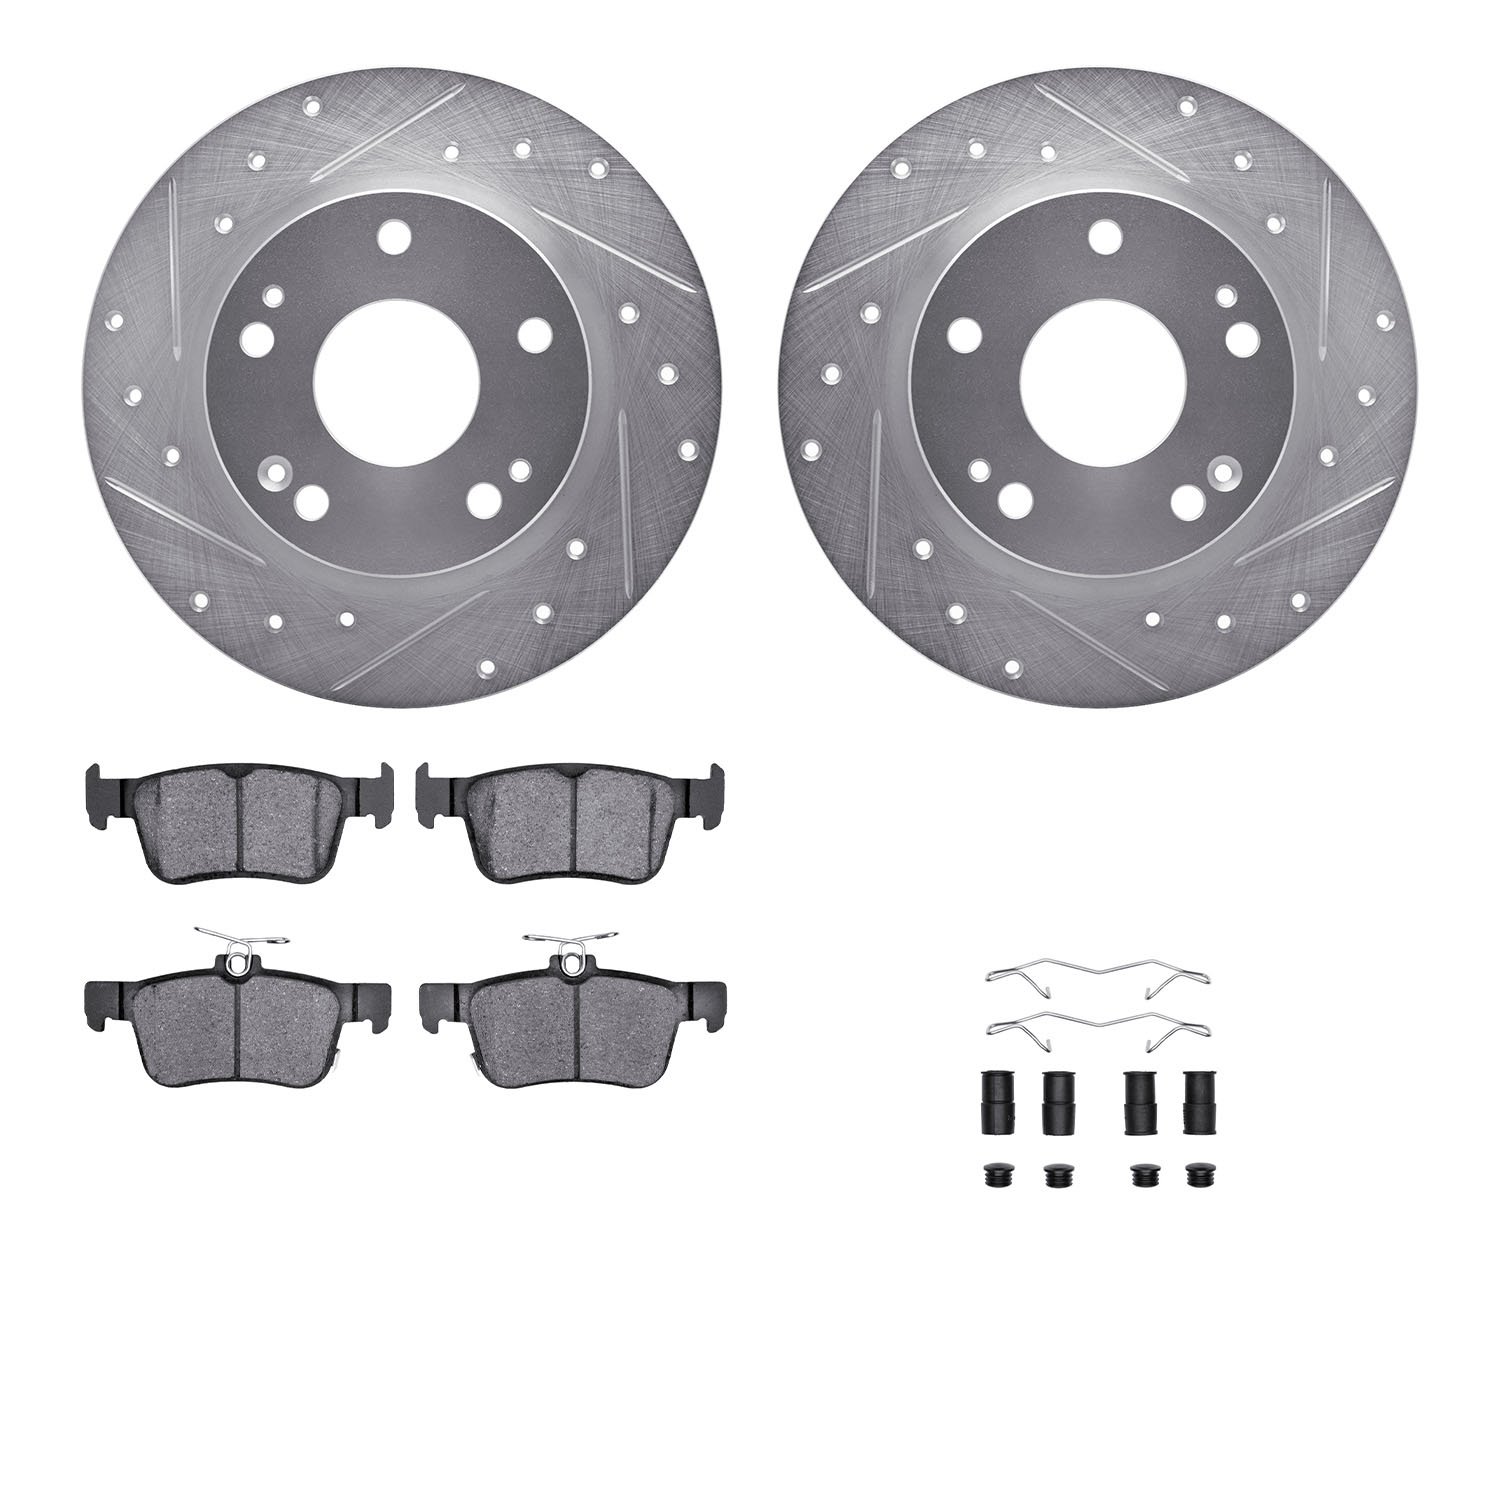 7312-59107 Drilled/Slotted Brake Rotor with 3000-Series Ceramic Brake Pads Kit & Hardware [Silver], Fits Select Acura/Honda, Pos